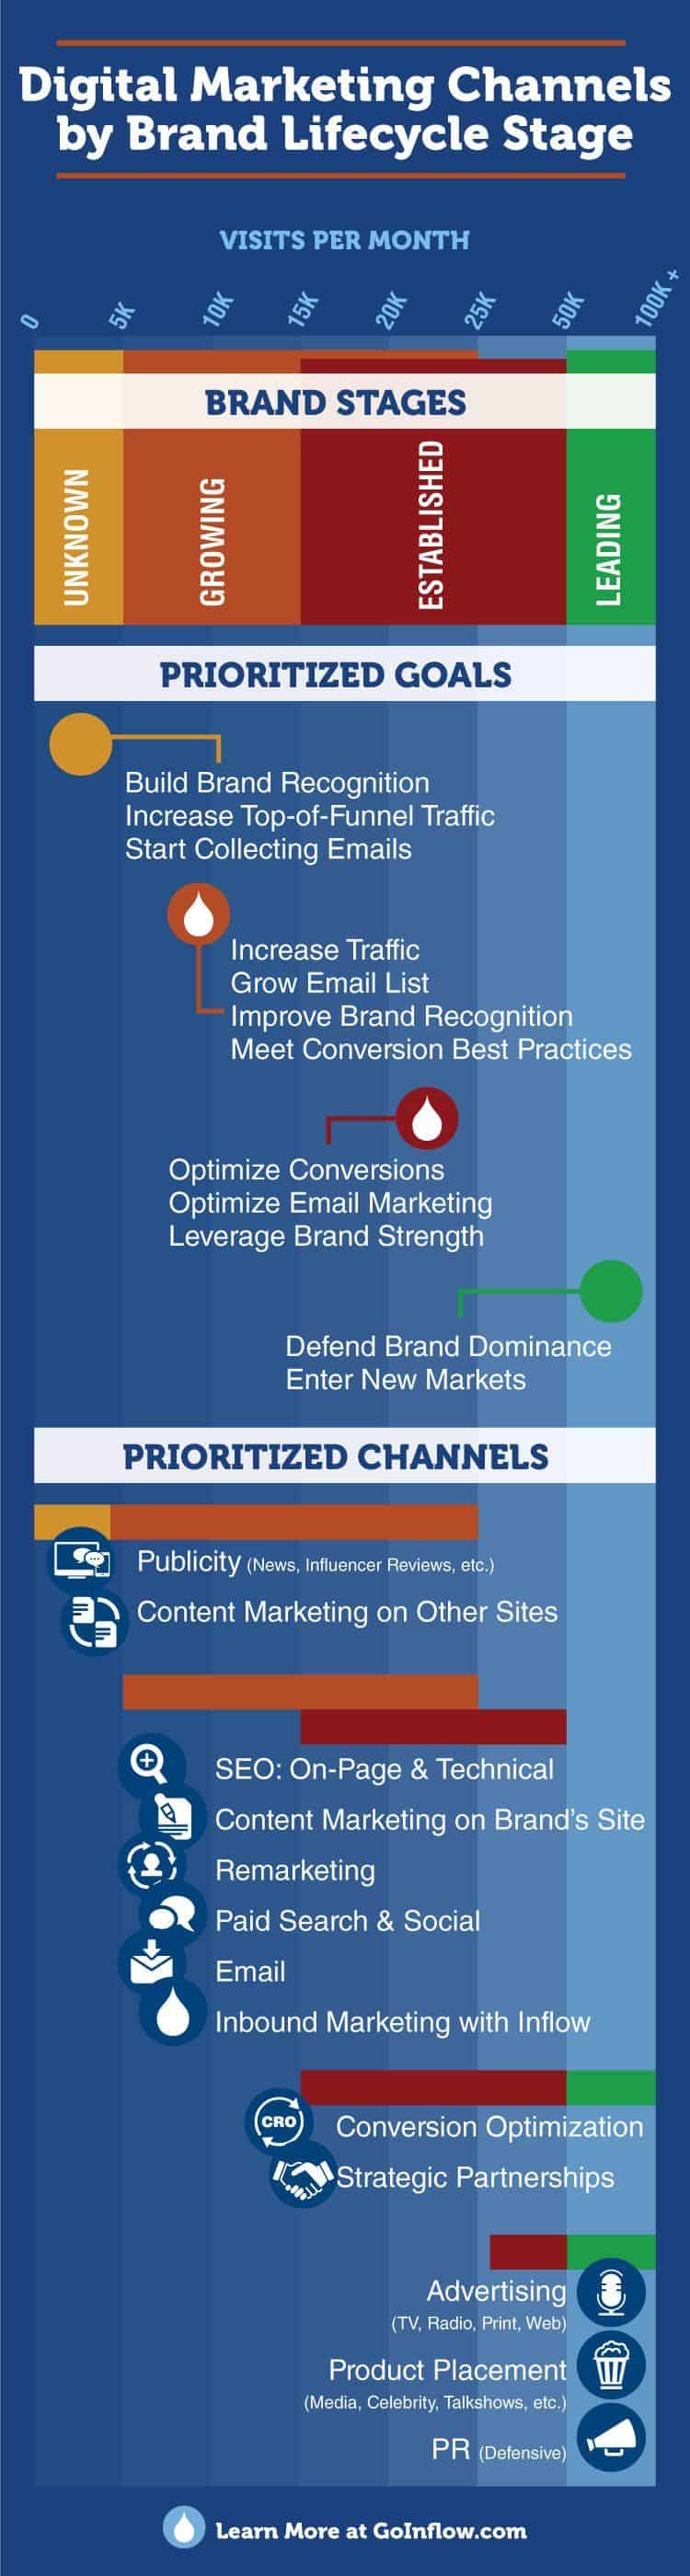 Digital Marketing Channels by Brand Lifecycle Stage